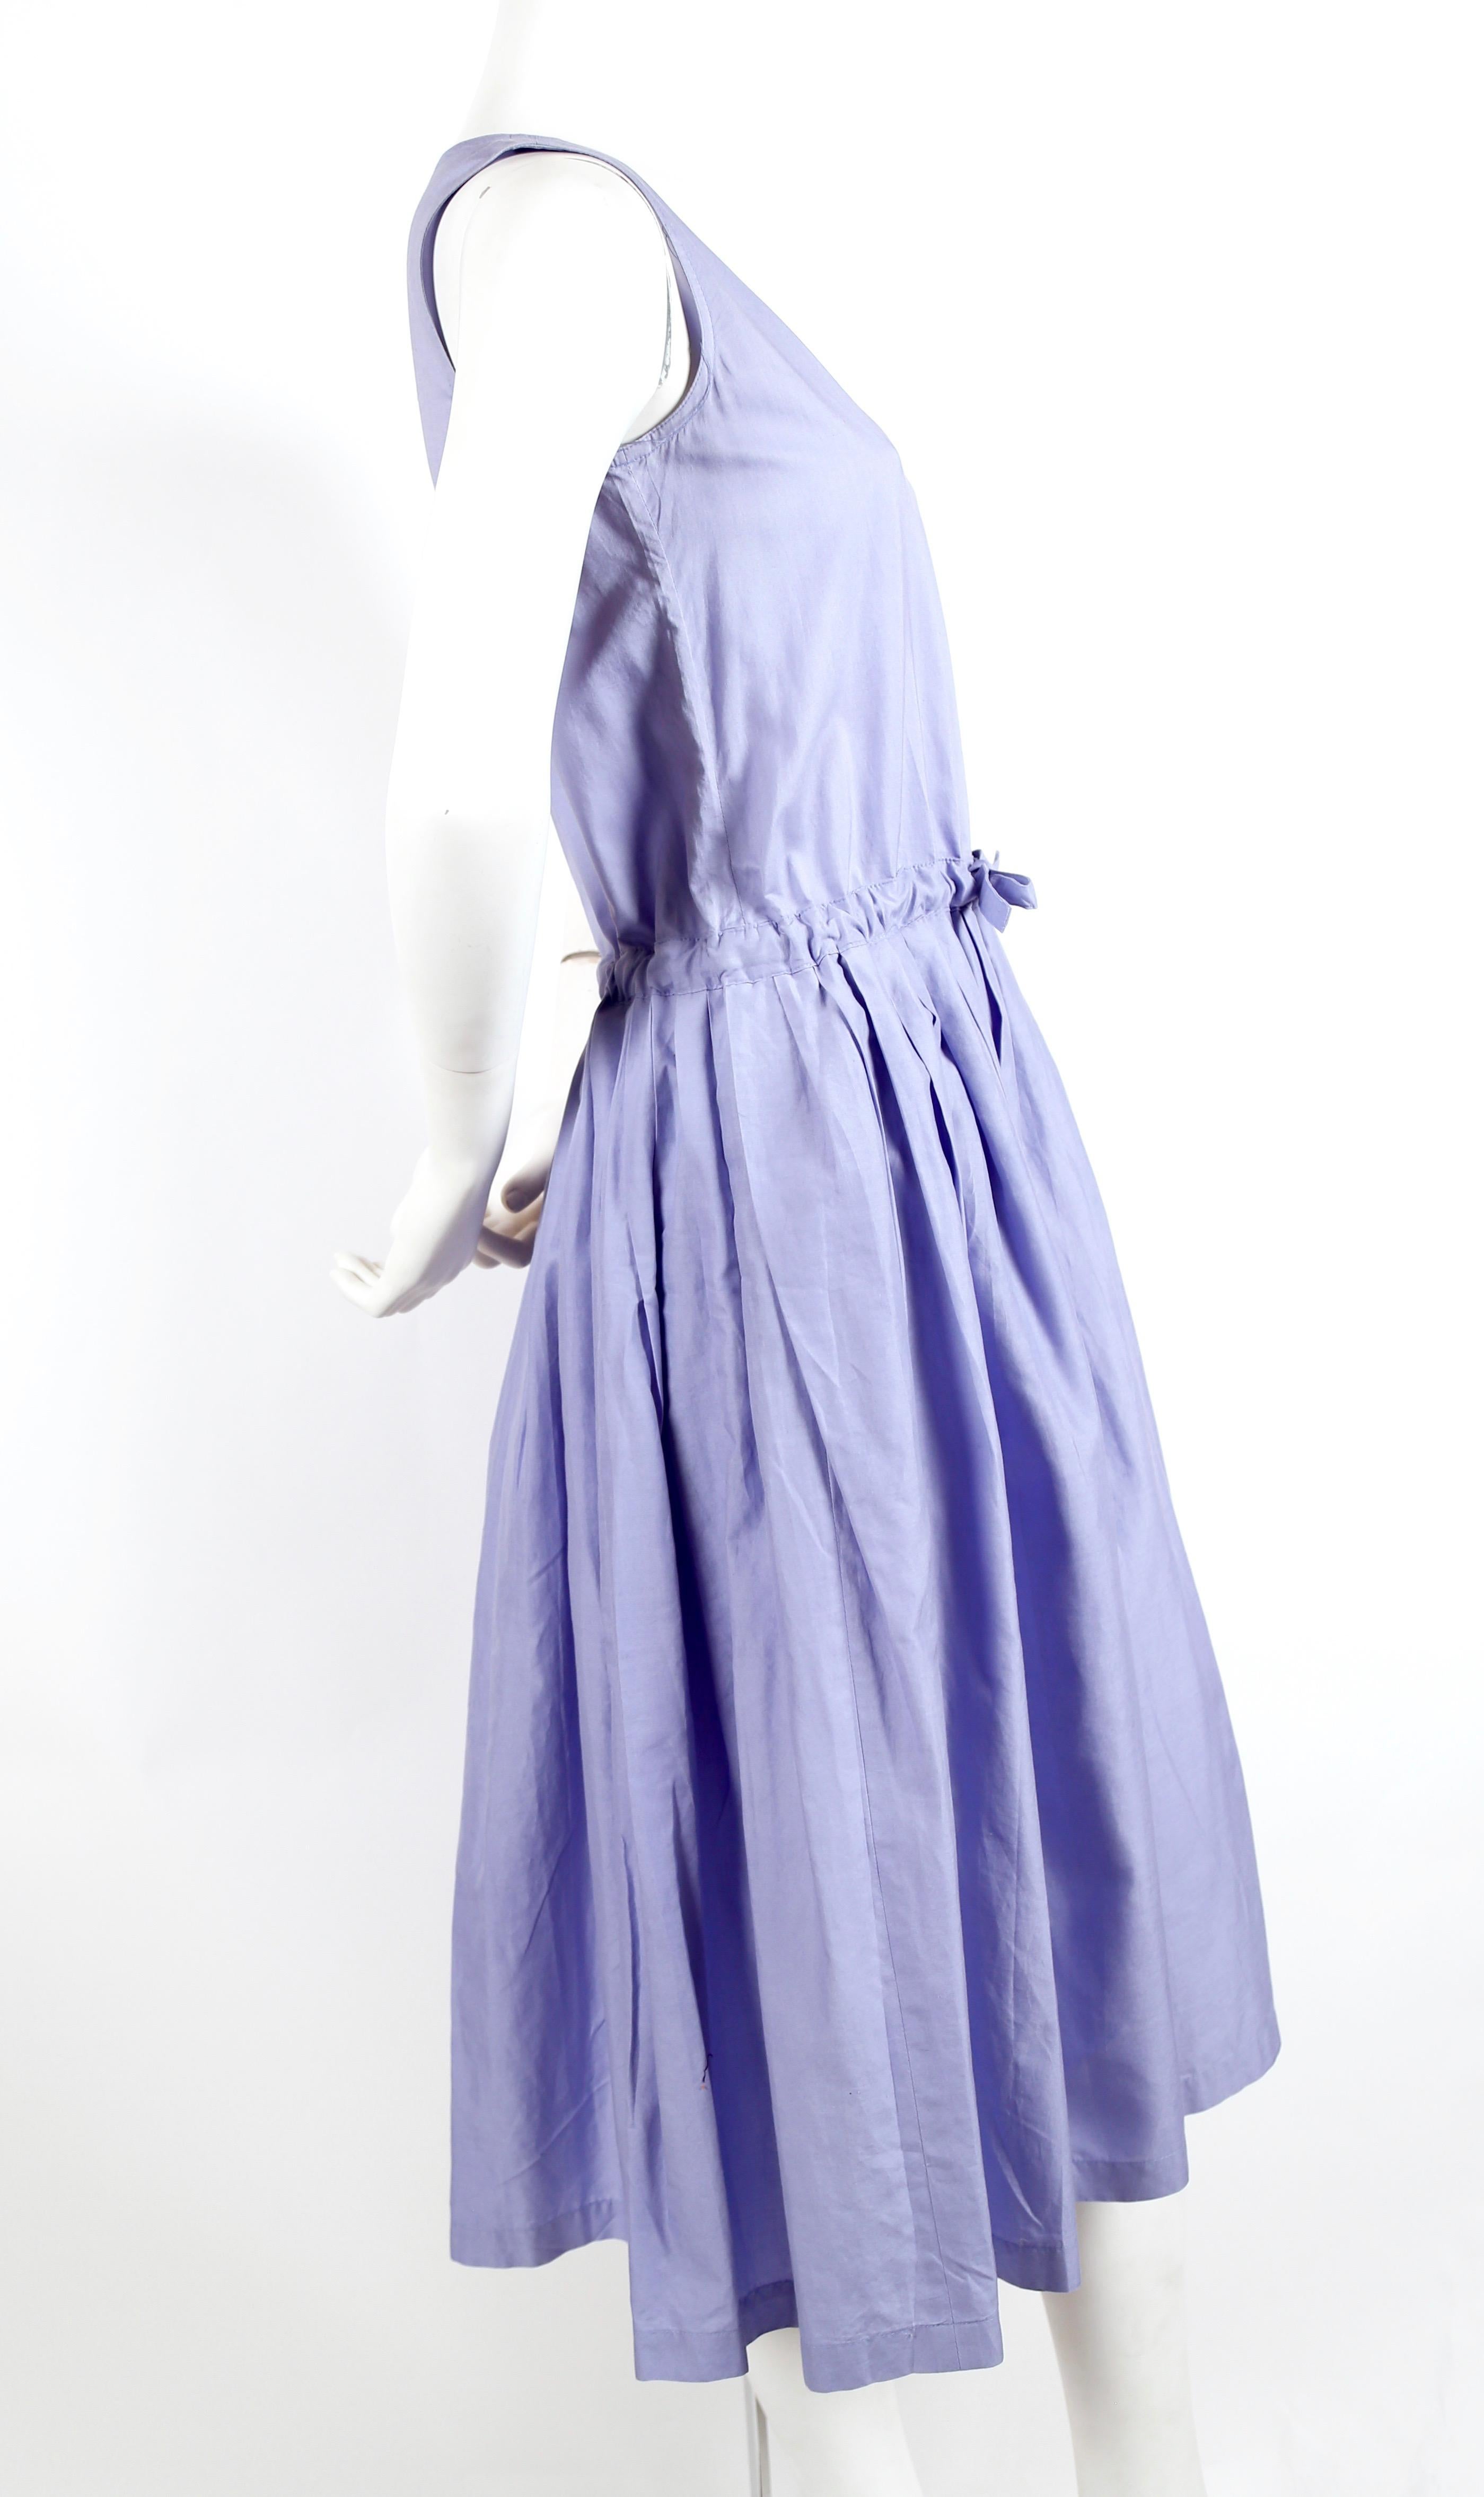 Periwinkle-blue, cotton day dress with pleats and drawstring waistline designed by Issey Miyake dating to the early 1980's. Labeled a JP 9. This dress best fits an XS or S. Approximate measurements: bust 32.5